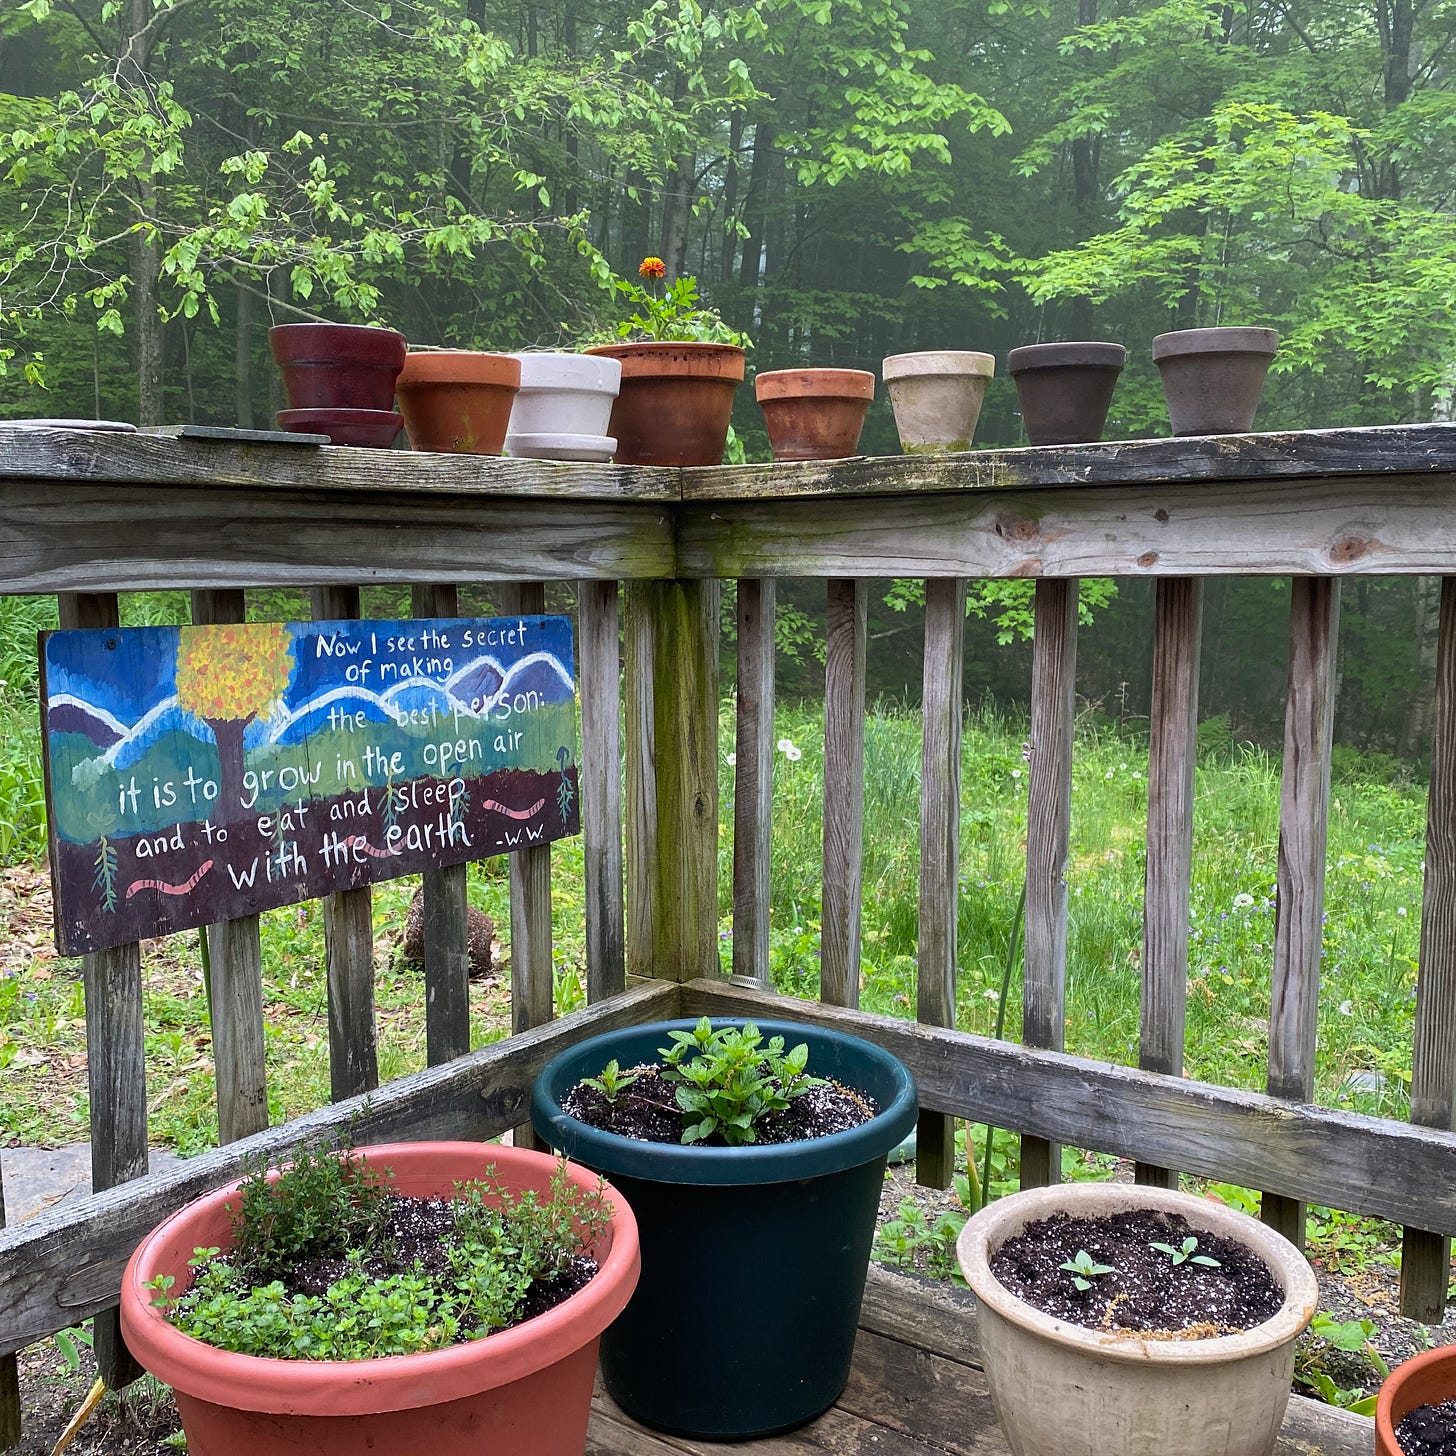 Several large pots of herbs arranged along a porch railing. A collection of tiny pots, one with a marigold flower in it, sit on top of the railing. Behind the porch, the trees are green and misty.